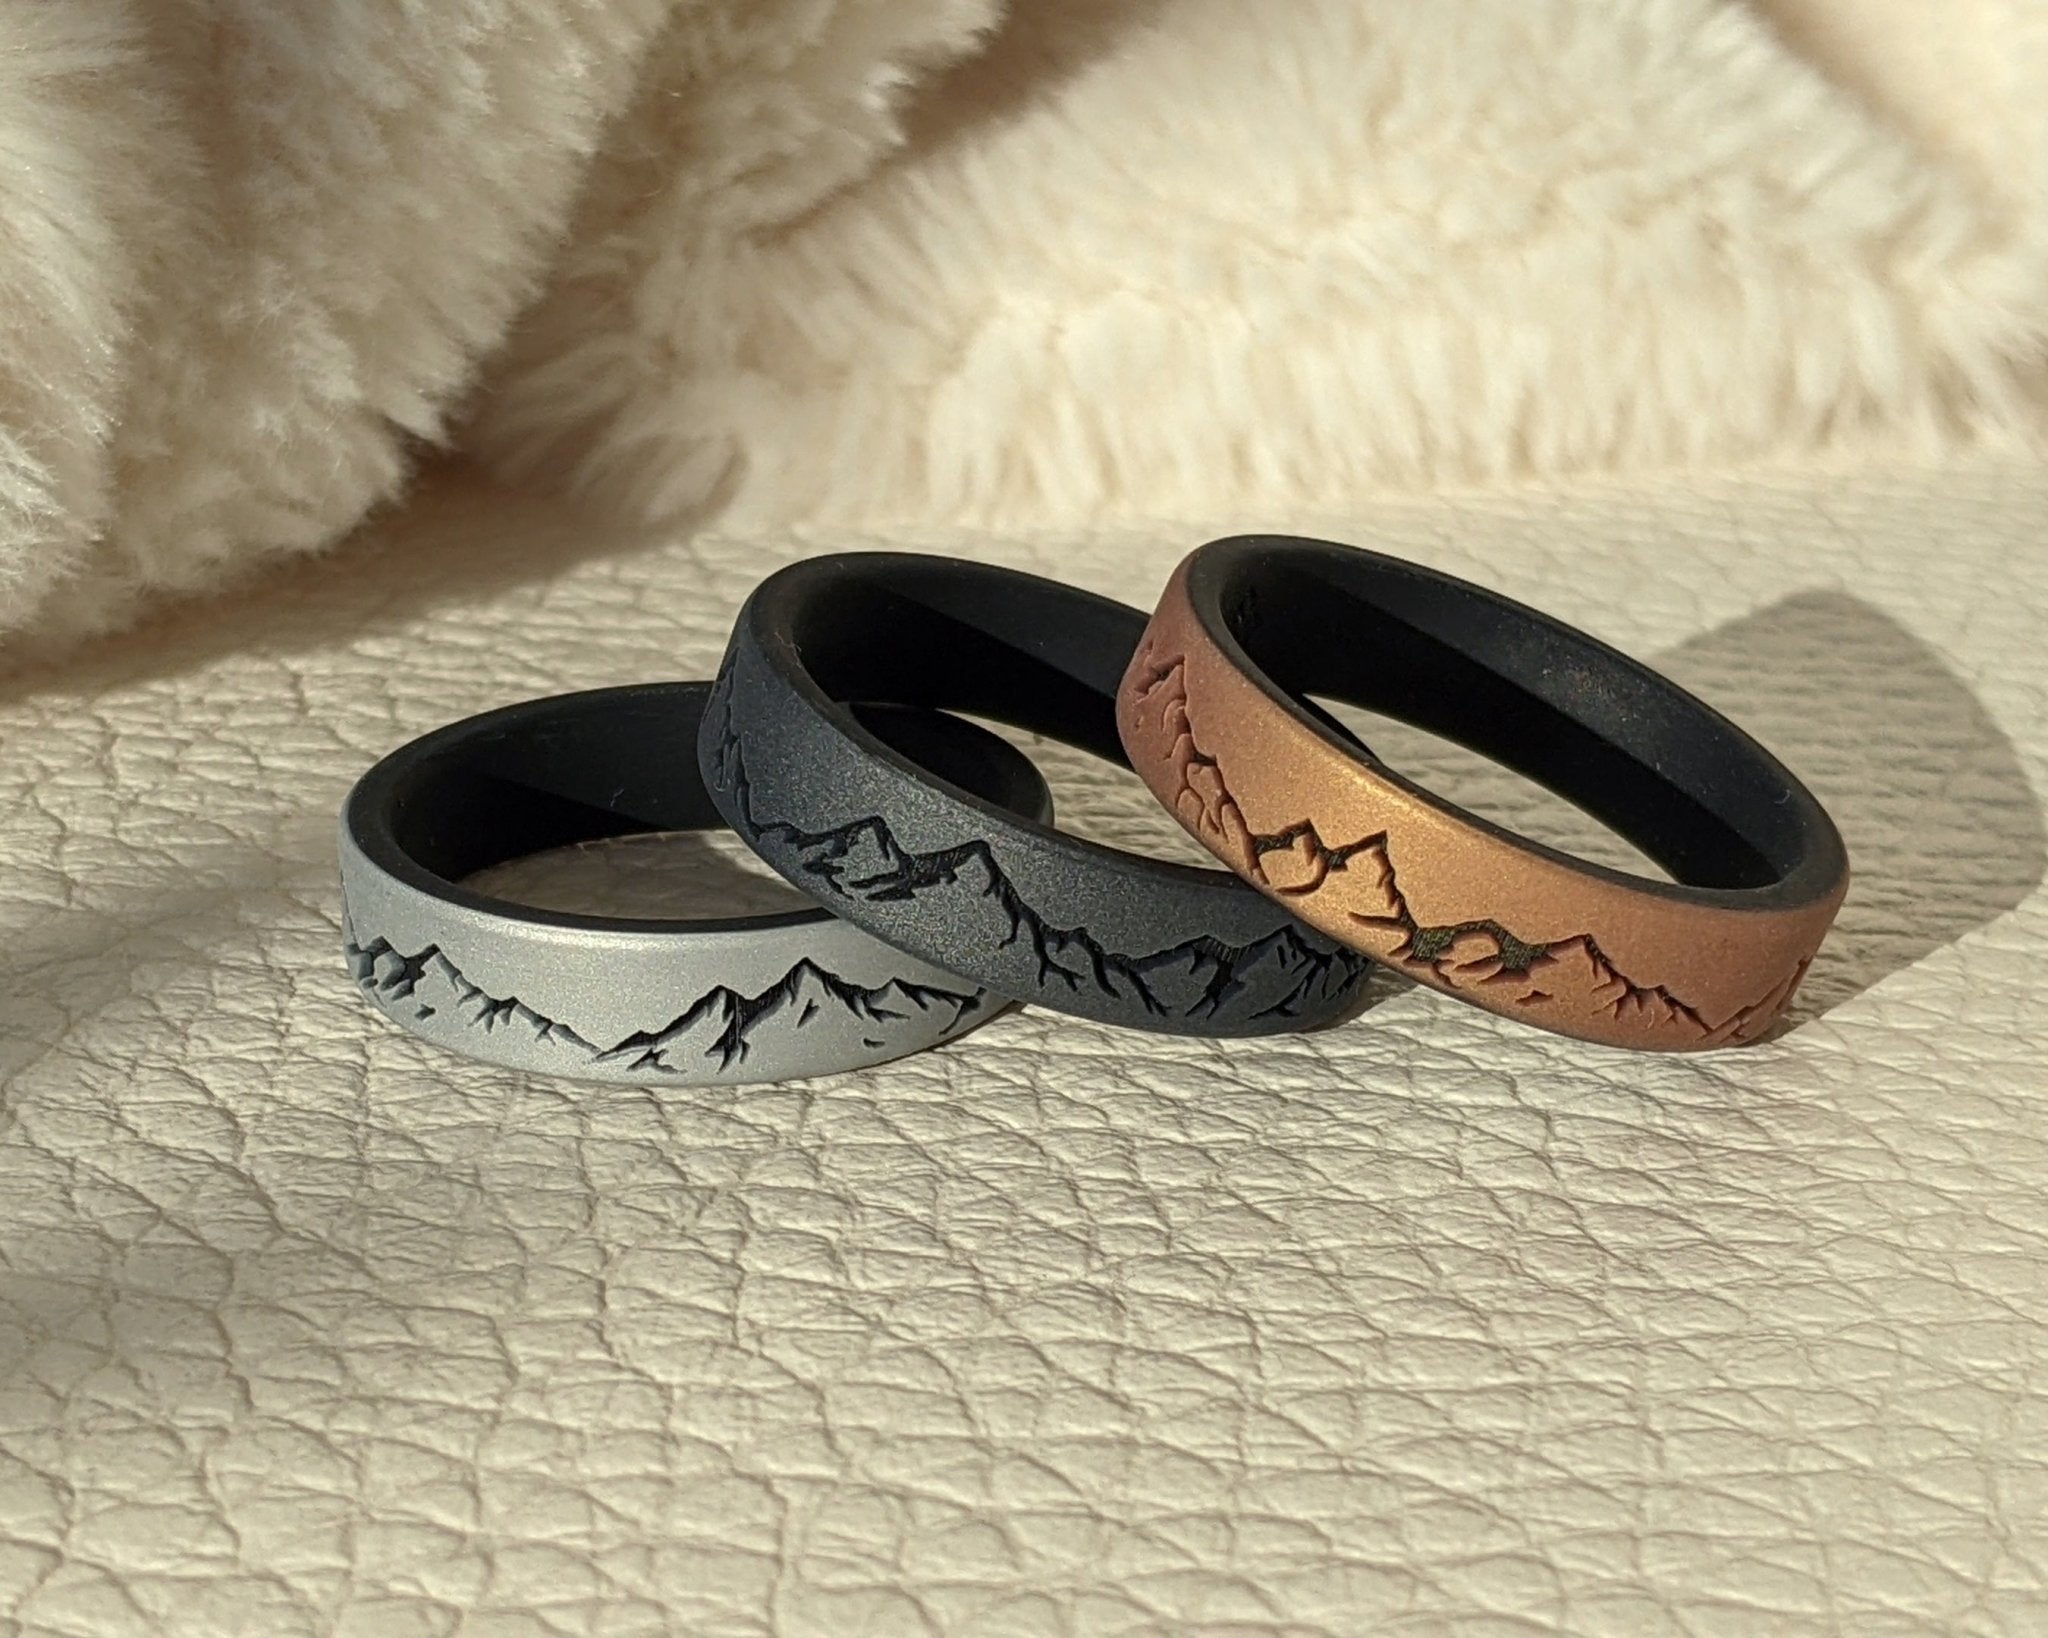 Engraved Mountain Silicone Ring - Dual Layer - Knot Theory